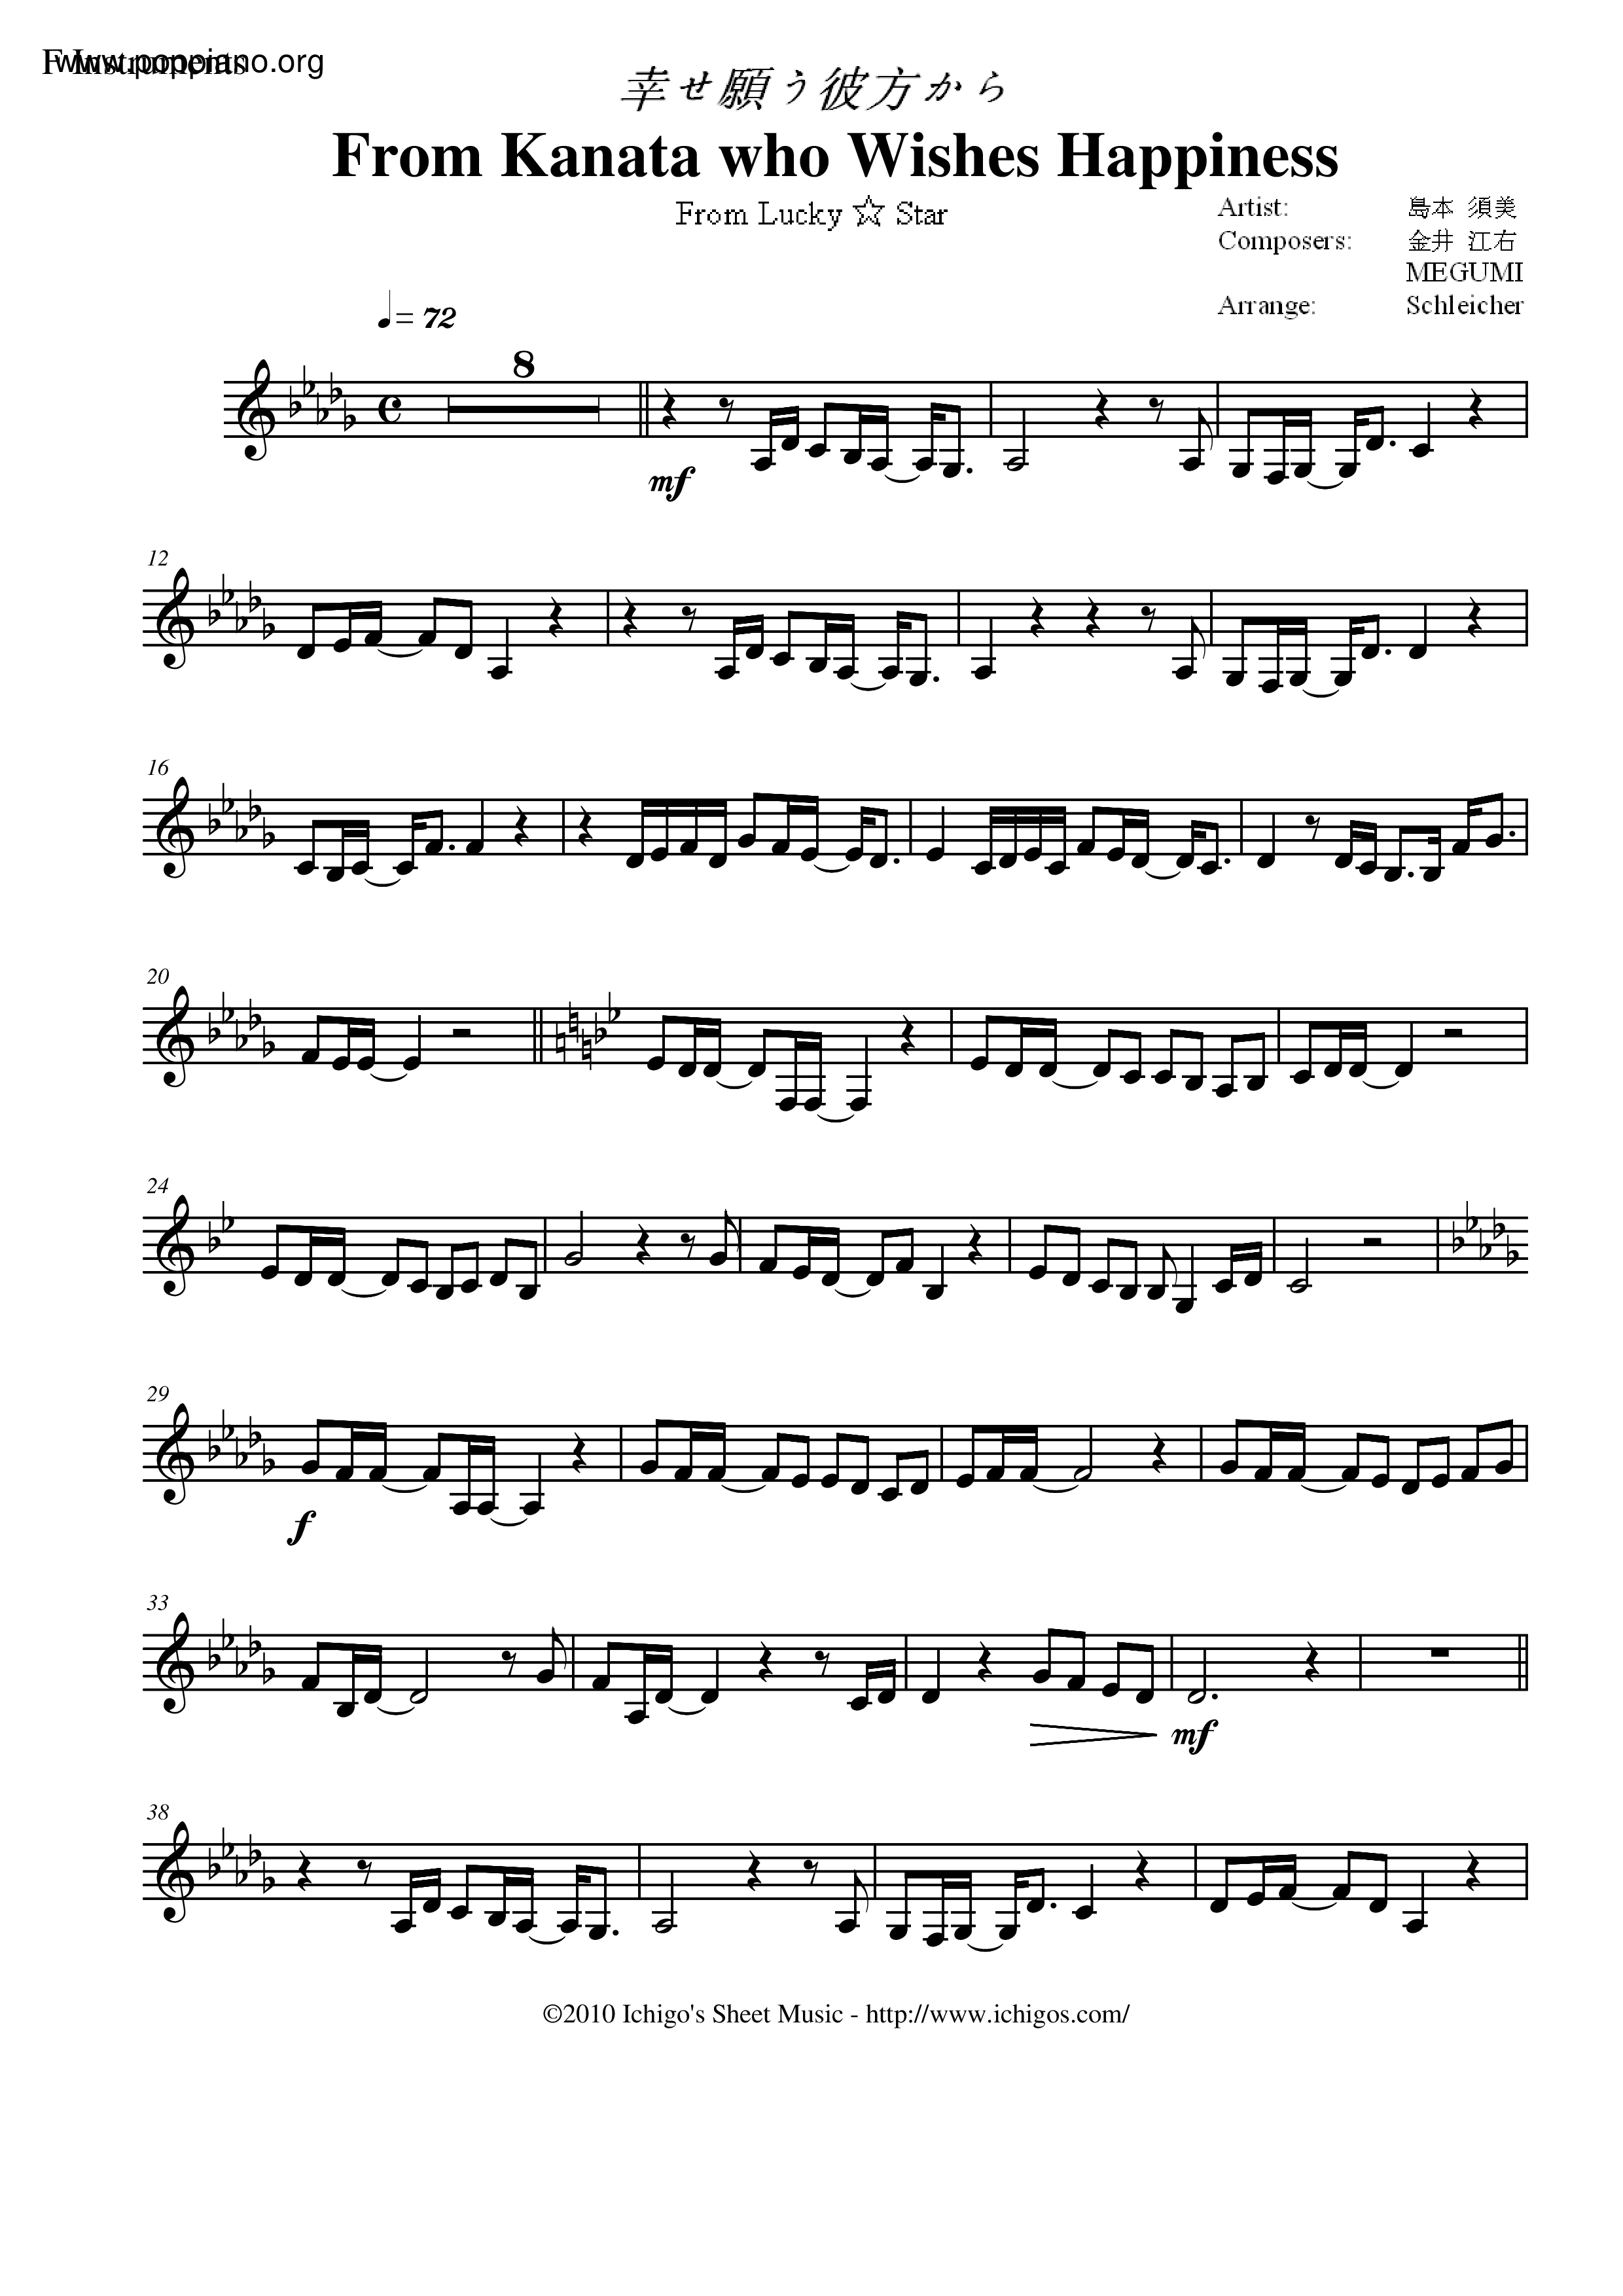 Lucky Star From Kanata Who Wishes Happiness Sheet Music Pdf 幸せ願う彼方から 楽譜 Free Score Download